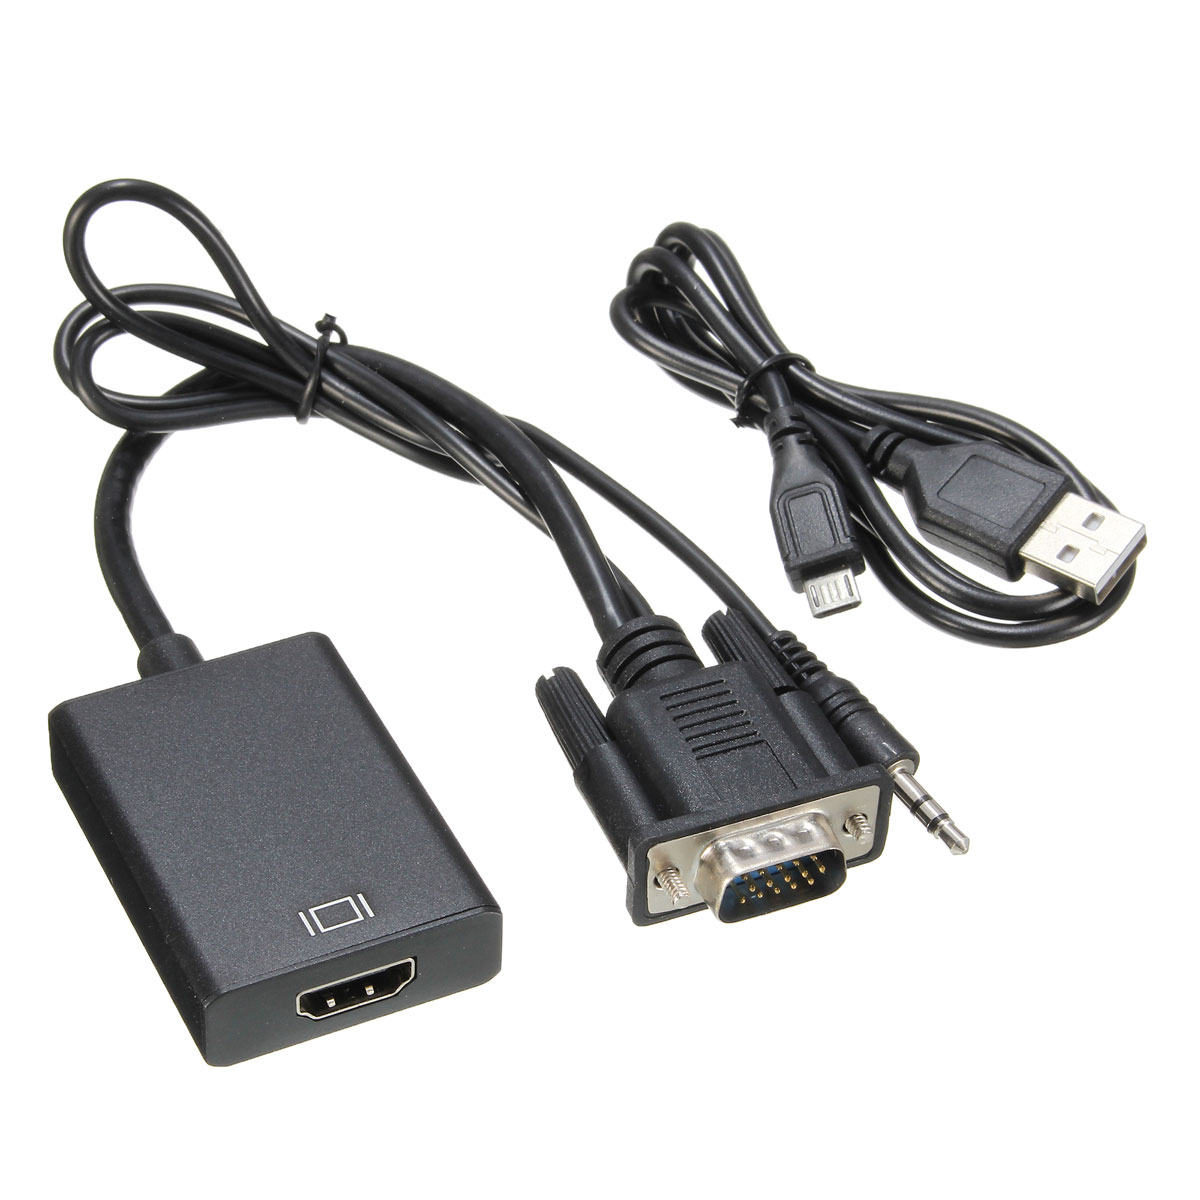 

VGA To HDMI Output 1080P HD with Audio Output TV AV HDTV Video Cable Converter Adapter